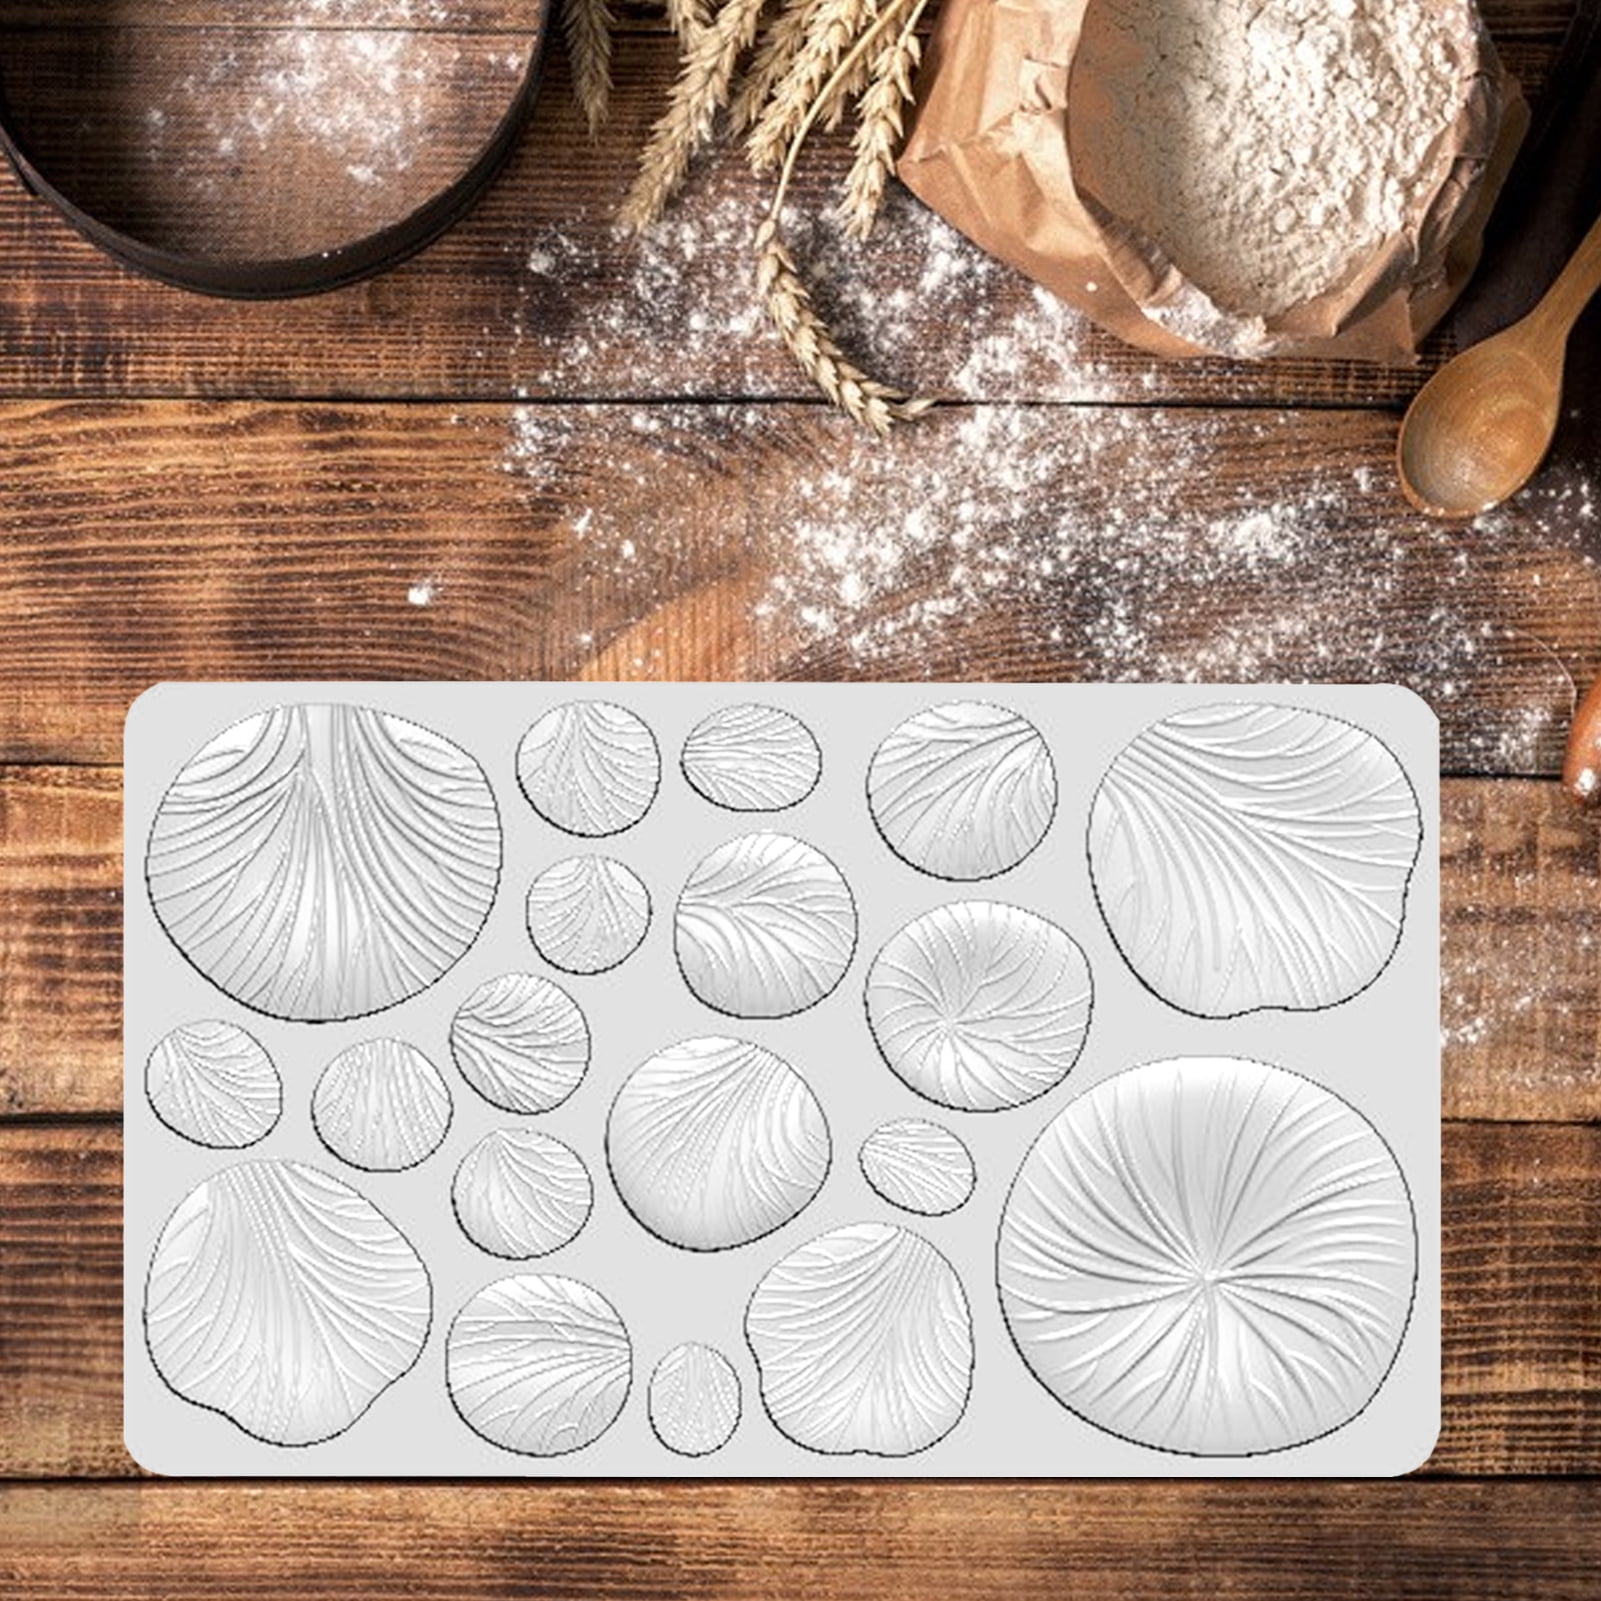 Mushrooms silicone mold for fondant DIY cake decoration L318 - Silicone  Molds Wholesale & Retail - Fondant, Soap, Candy, DIY Cake Molds